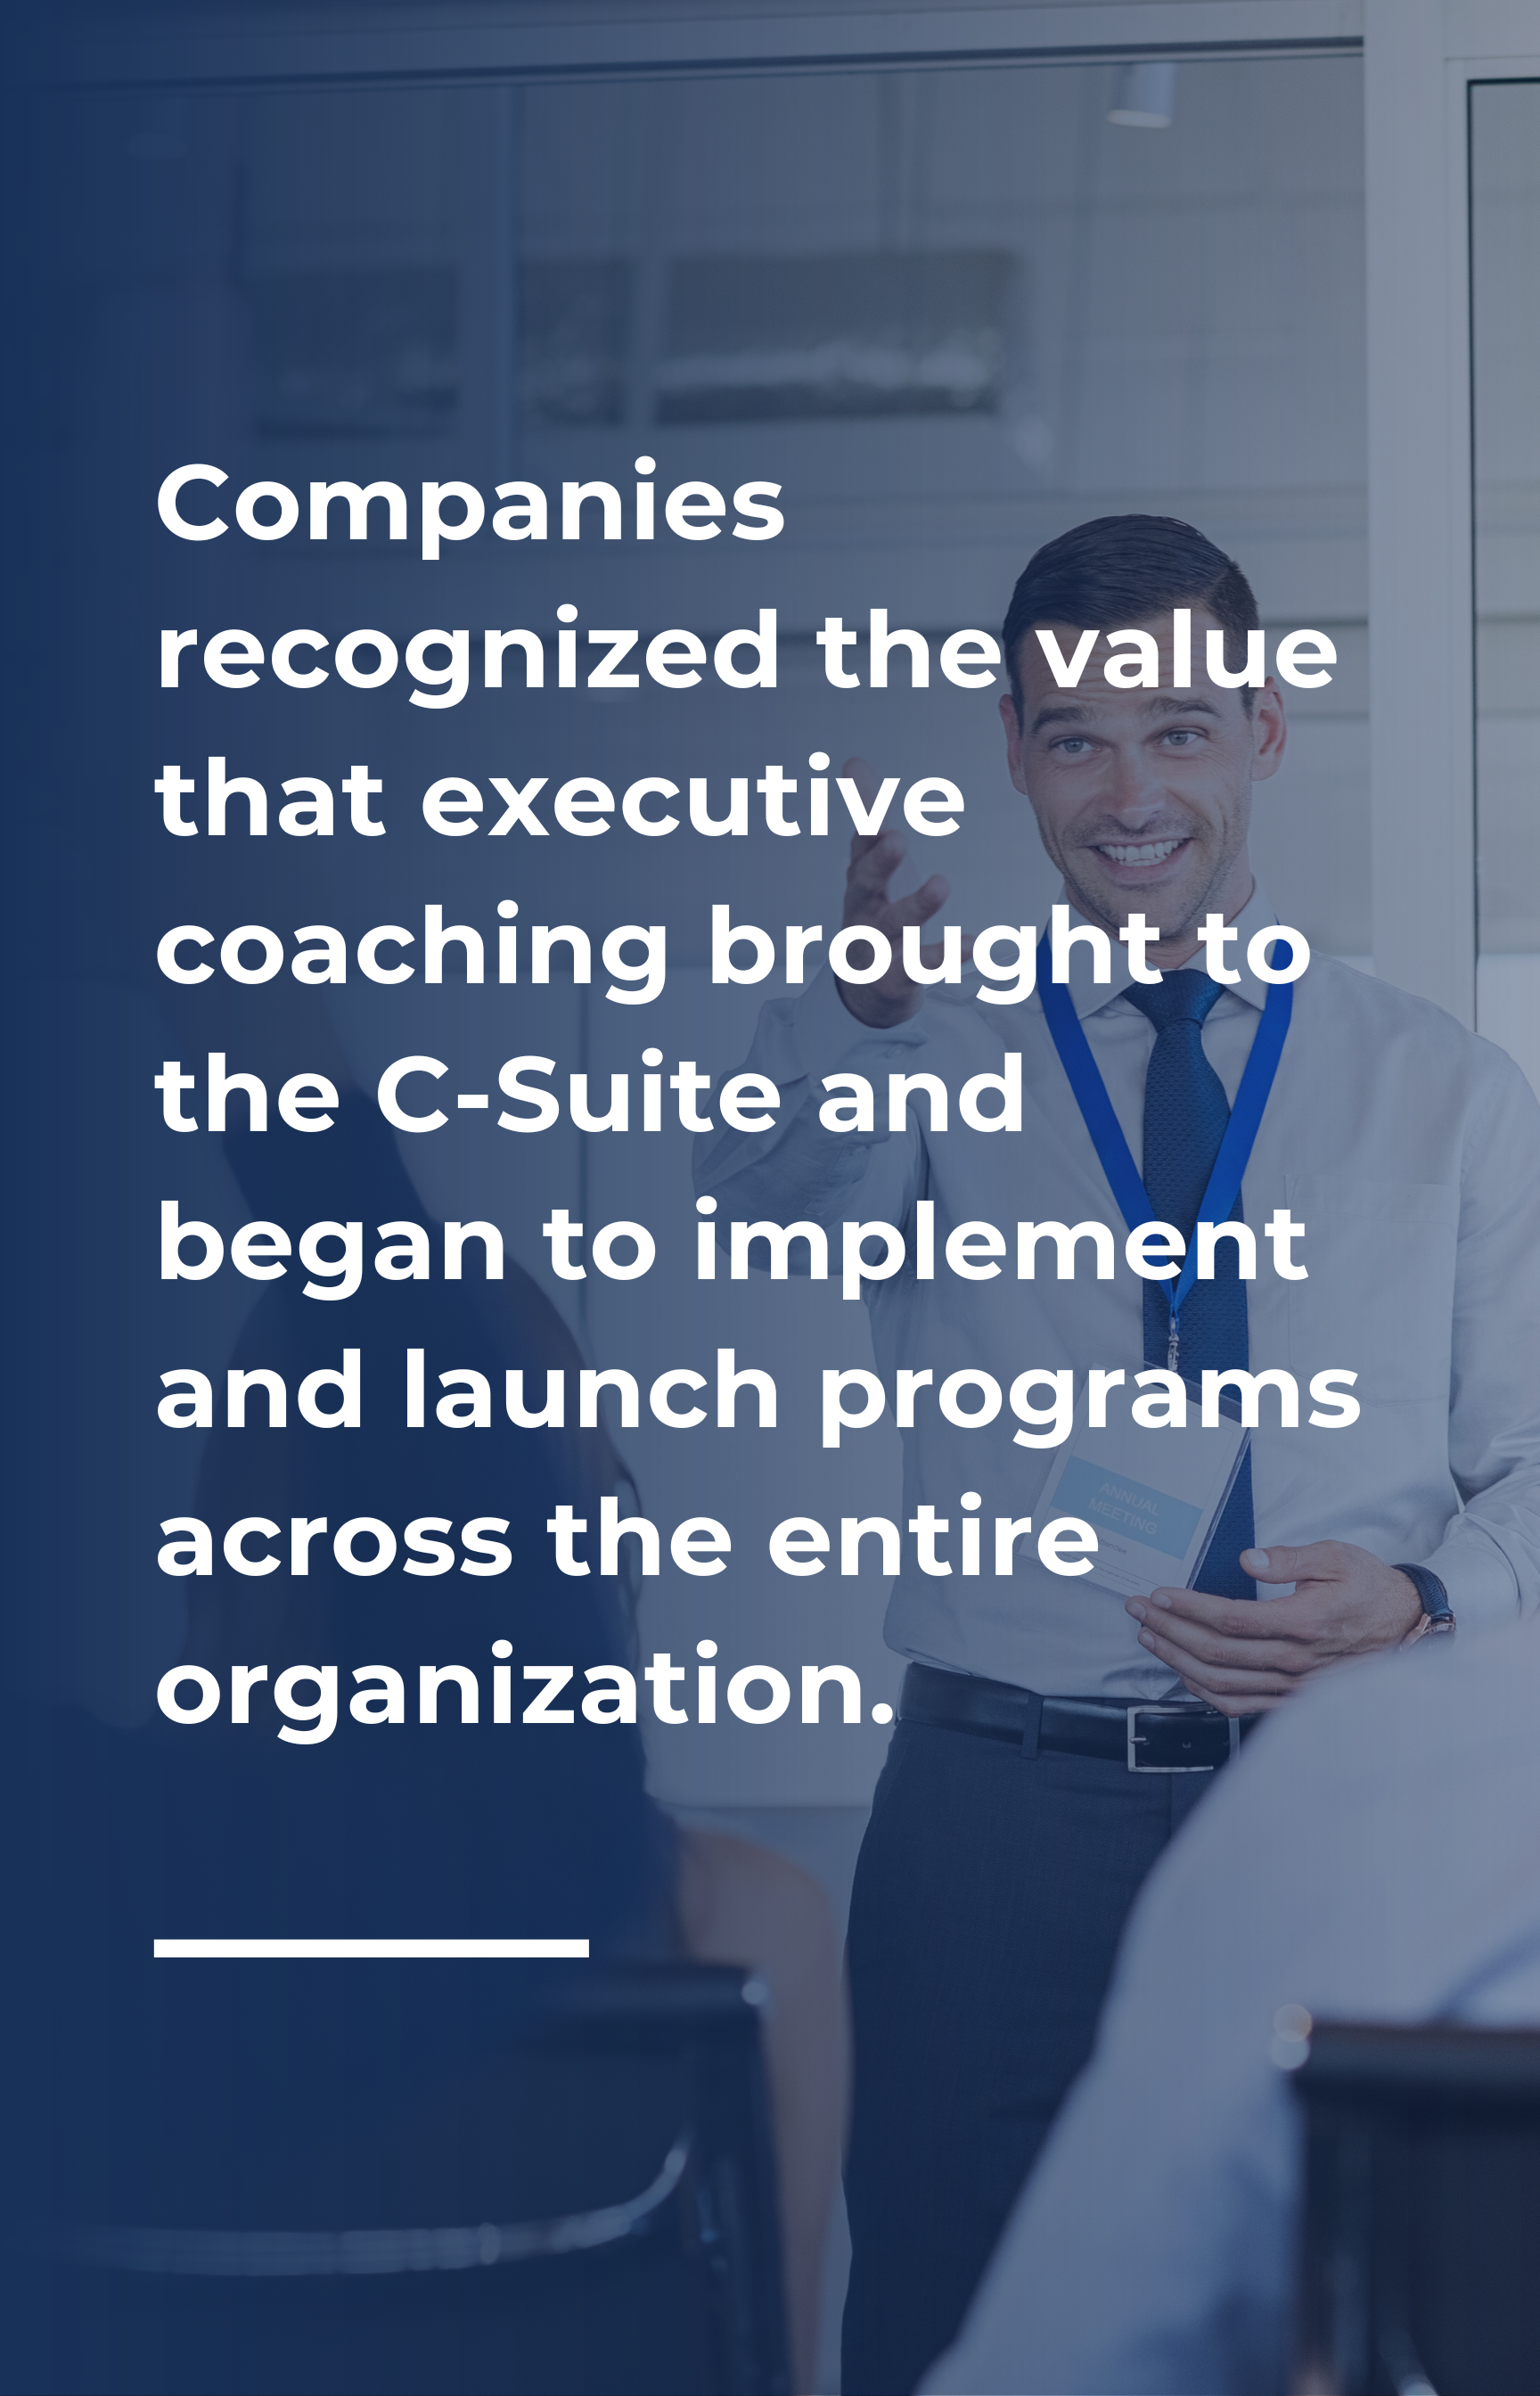 Companies recognized the value that executive coaching brought to the C-Suite and began to implement and launch programs across the entire organization.